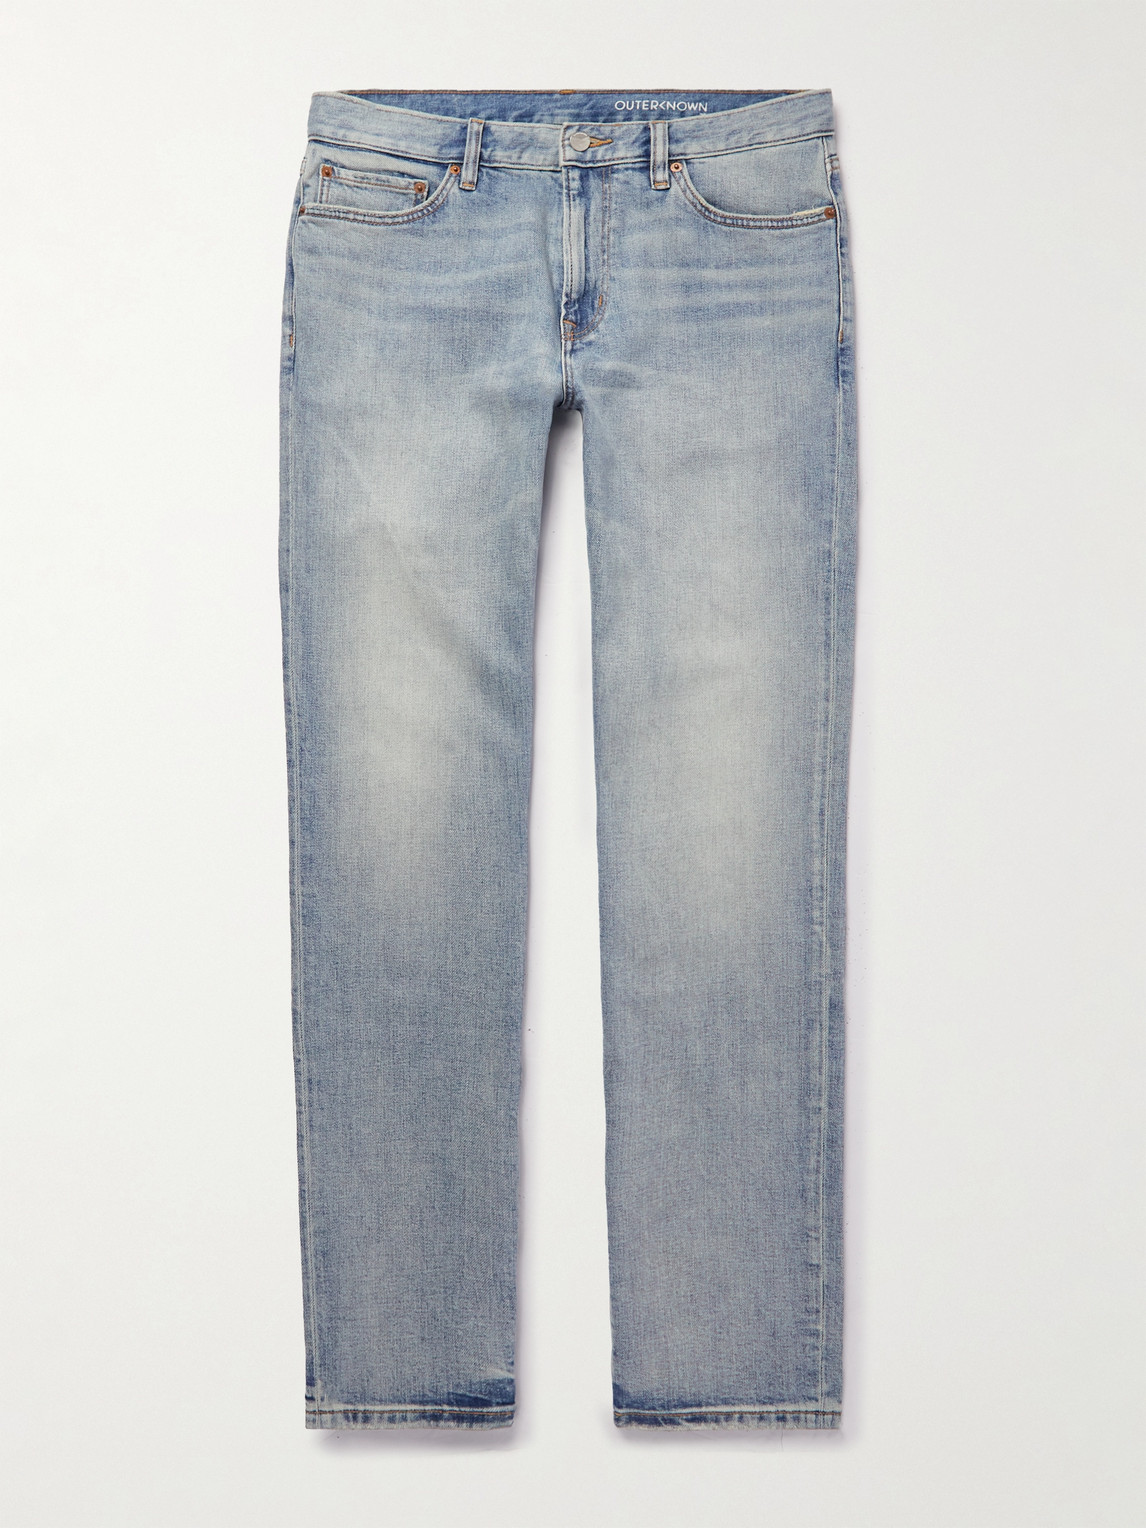 Outerknown Ambassador Slim-fit Organic Jeans In Blue